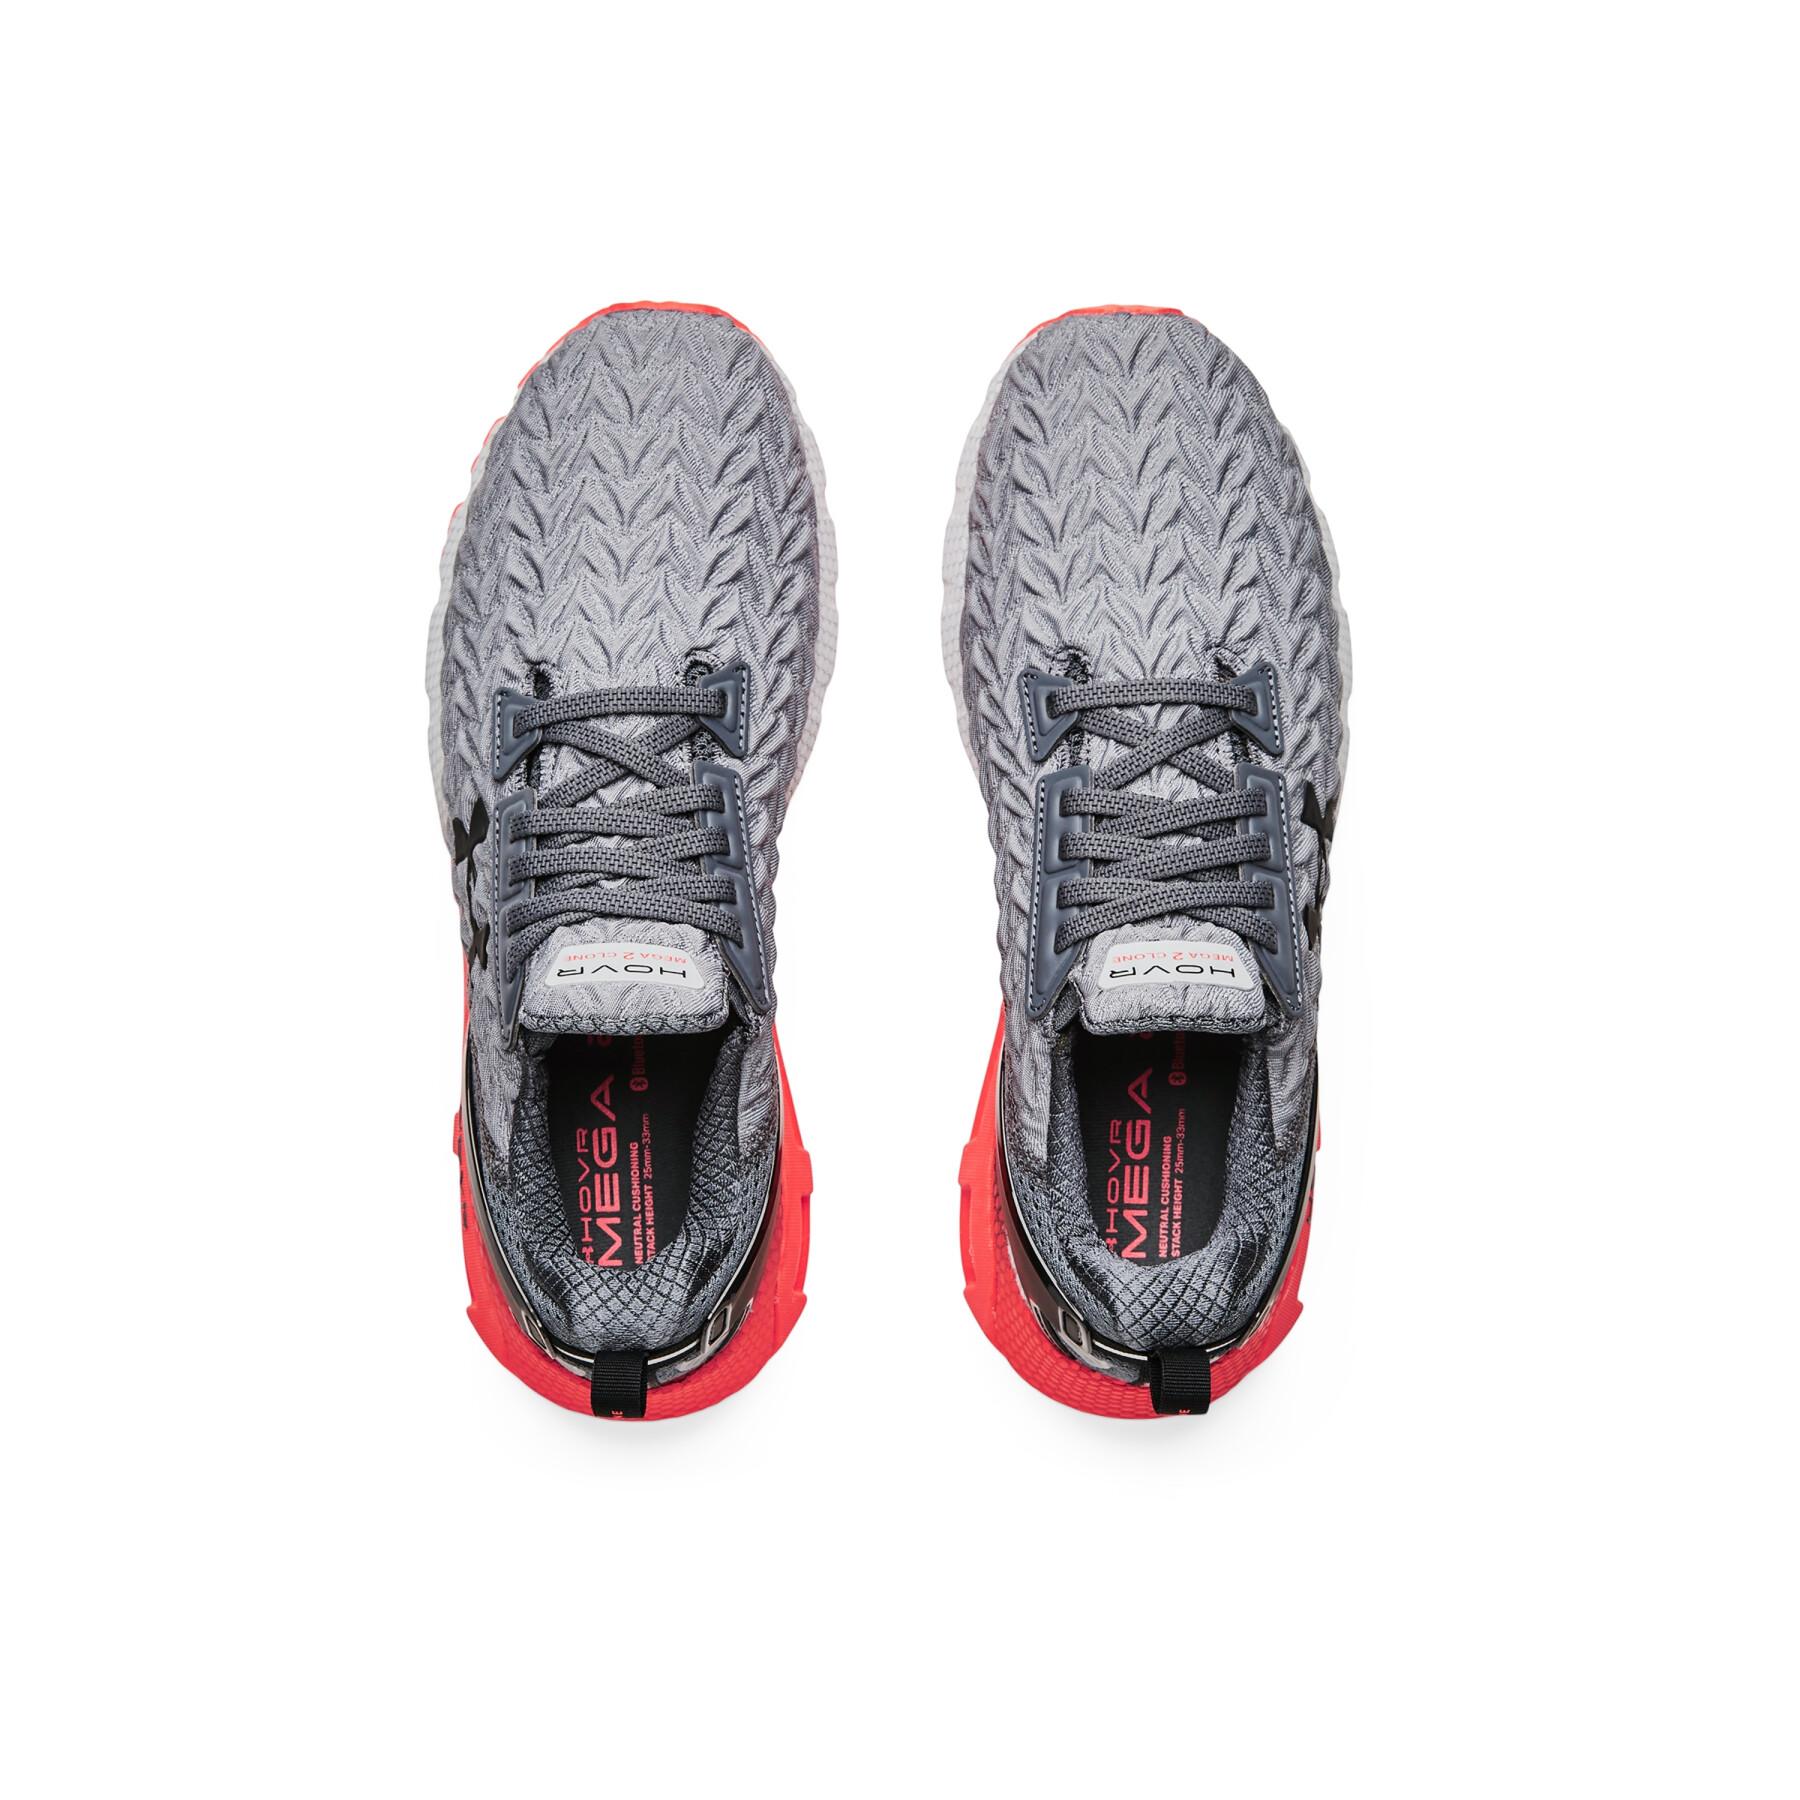 Running shoes Under Armour Hovr™ mega 2 clone